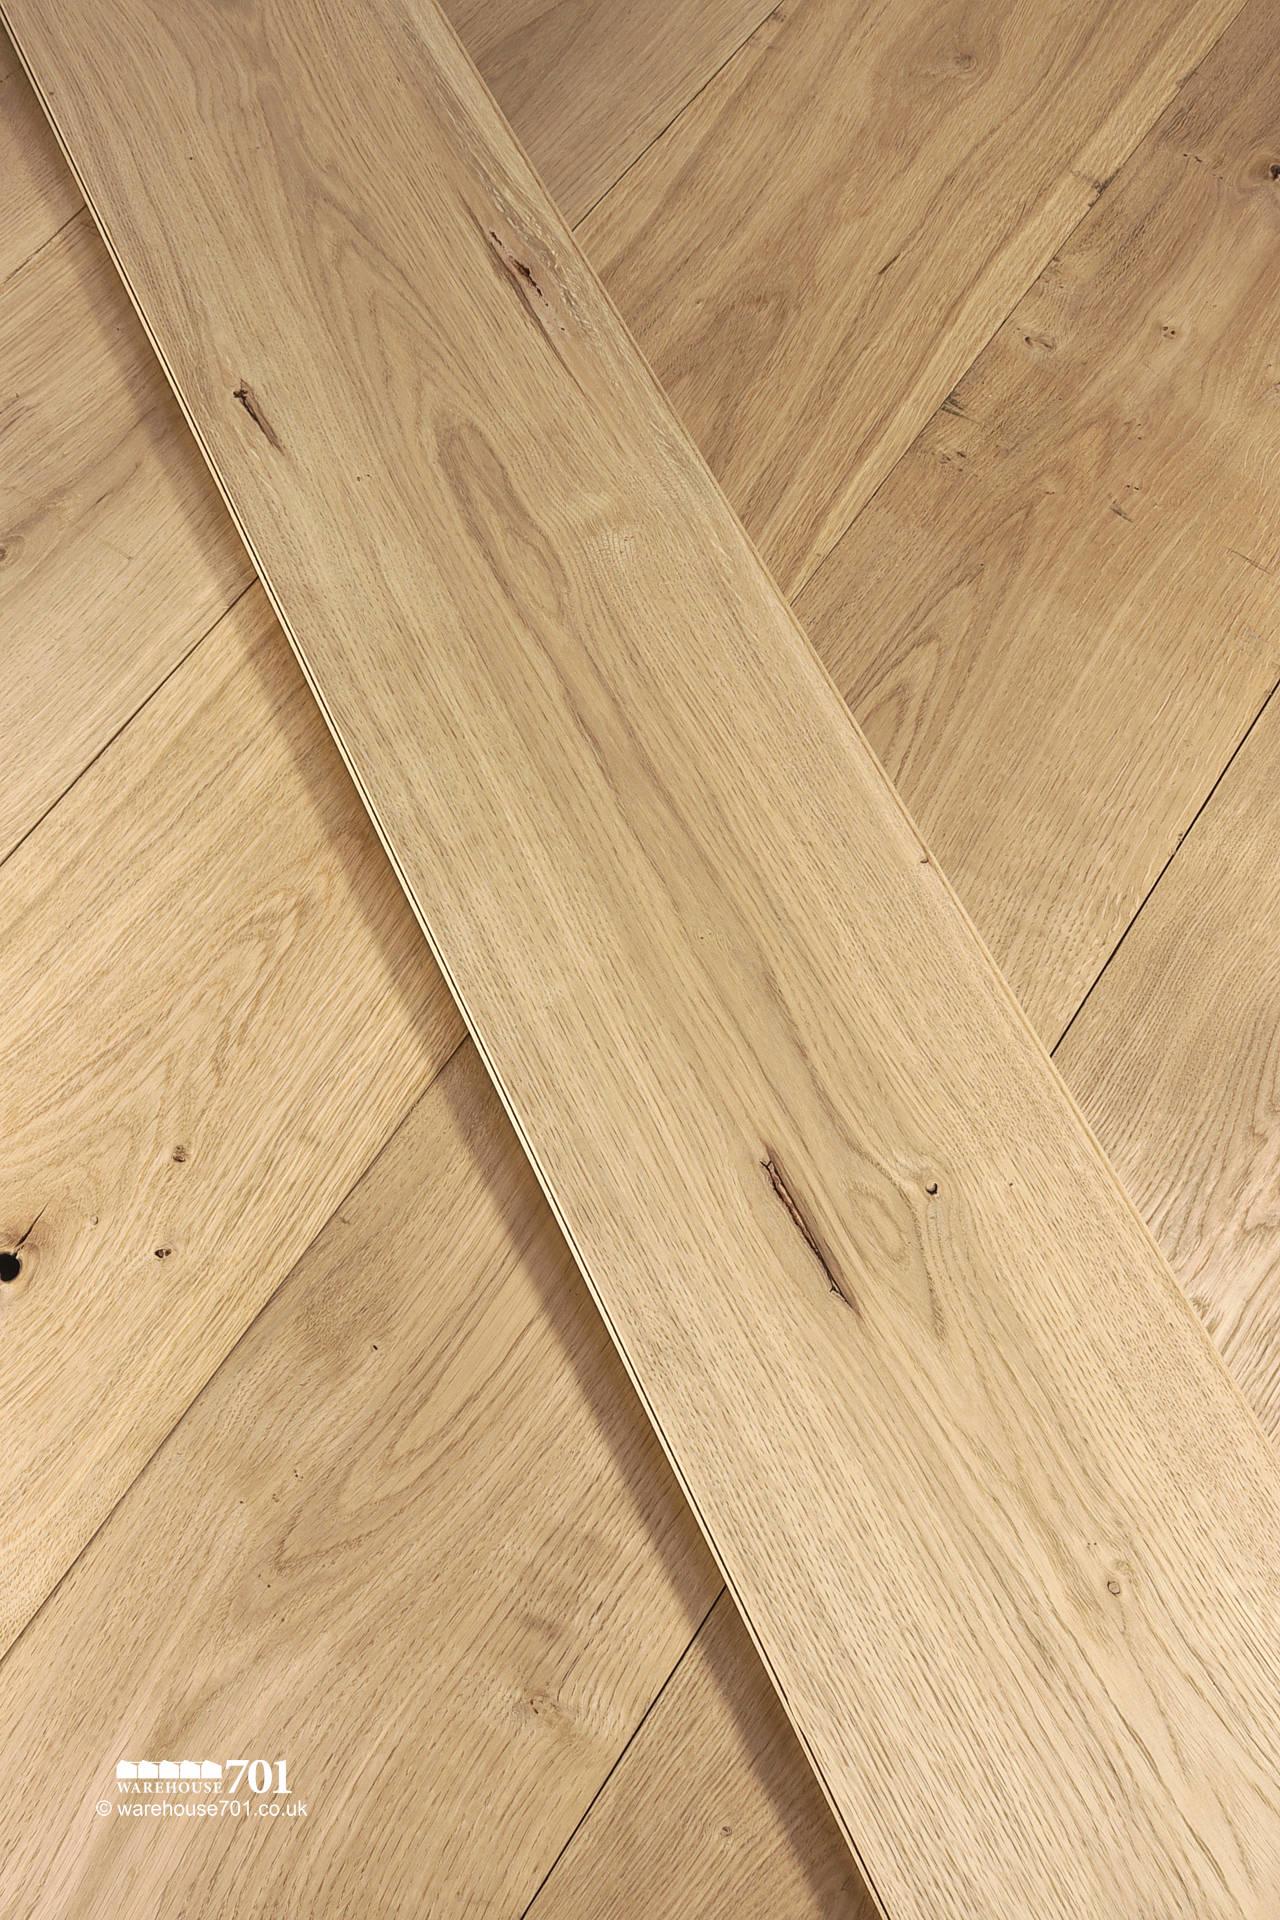 New Natural Oak Solid Wood Tongue and Groove Plank Flooring #4